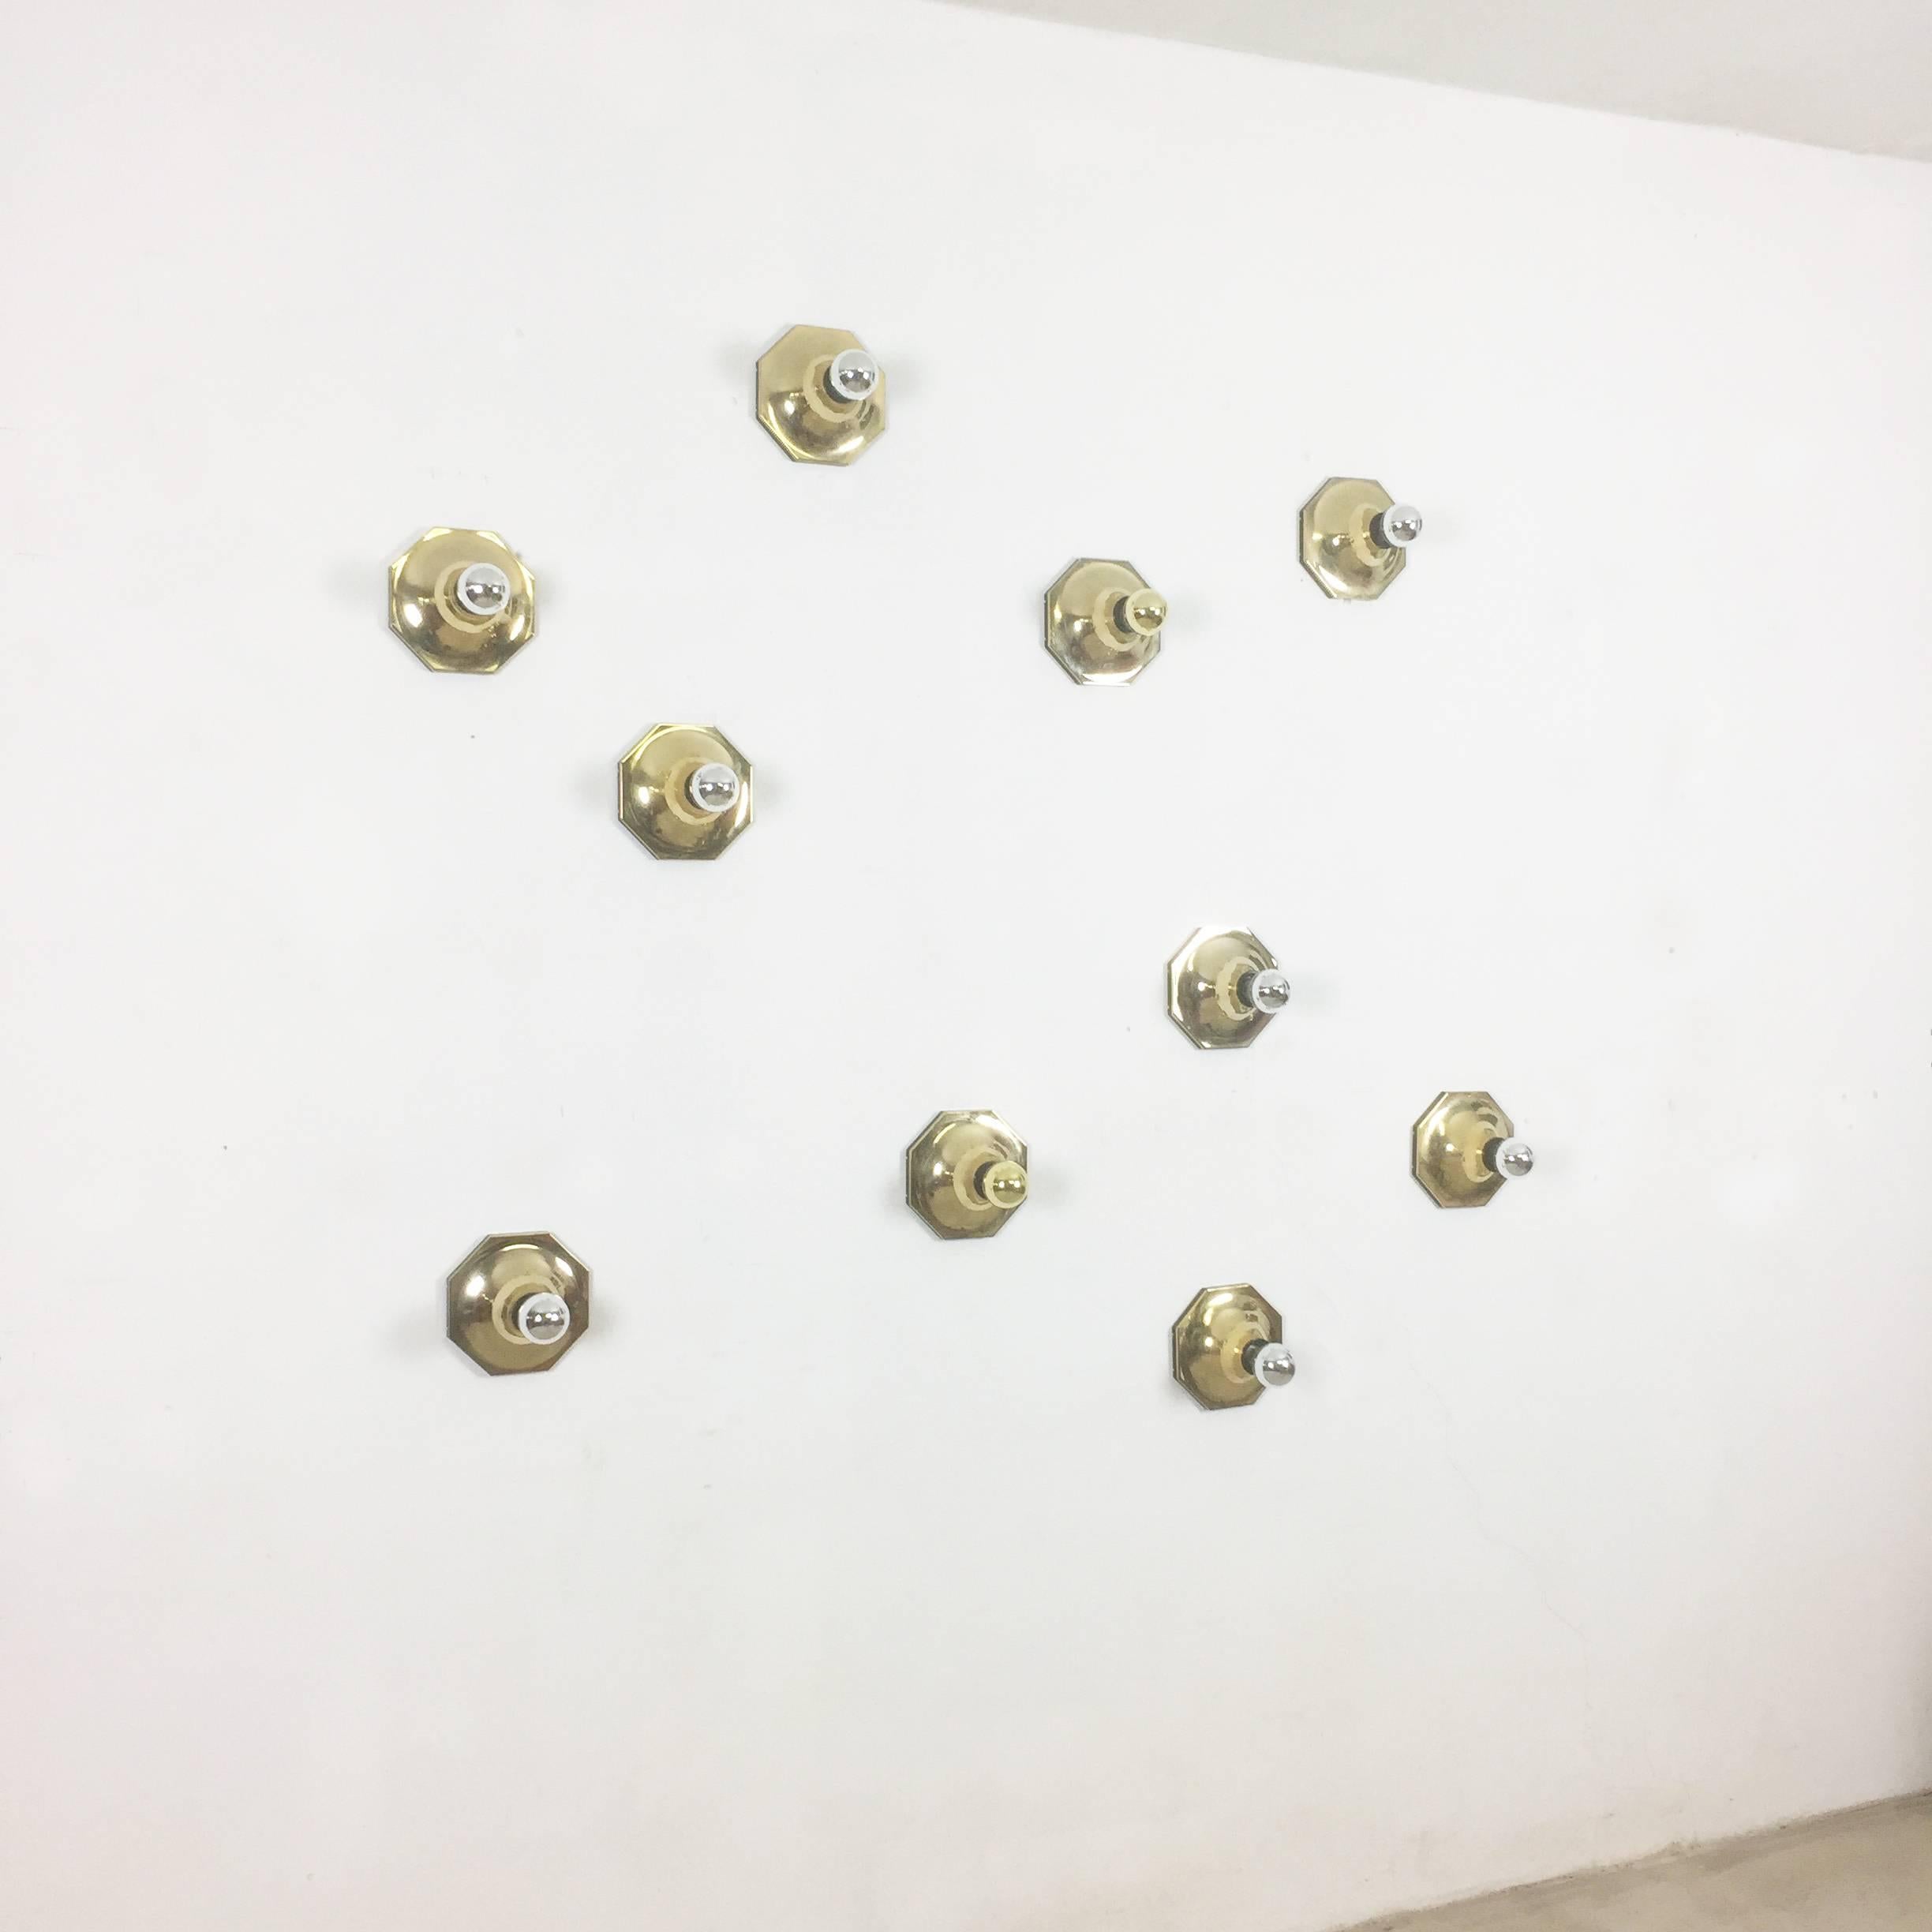 Set of Ten Golden Cubic Wall Lights by Motoko Ishii for Staff Lights, Germany 2